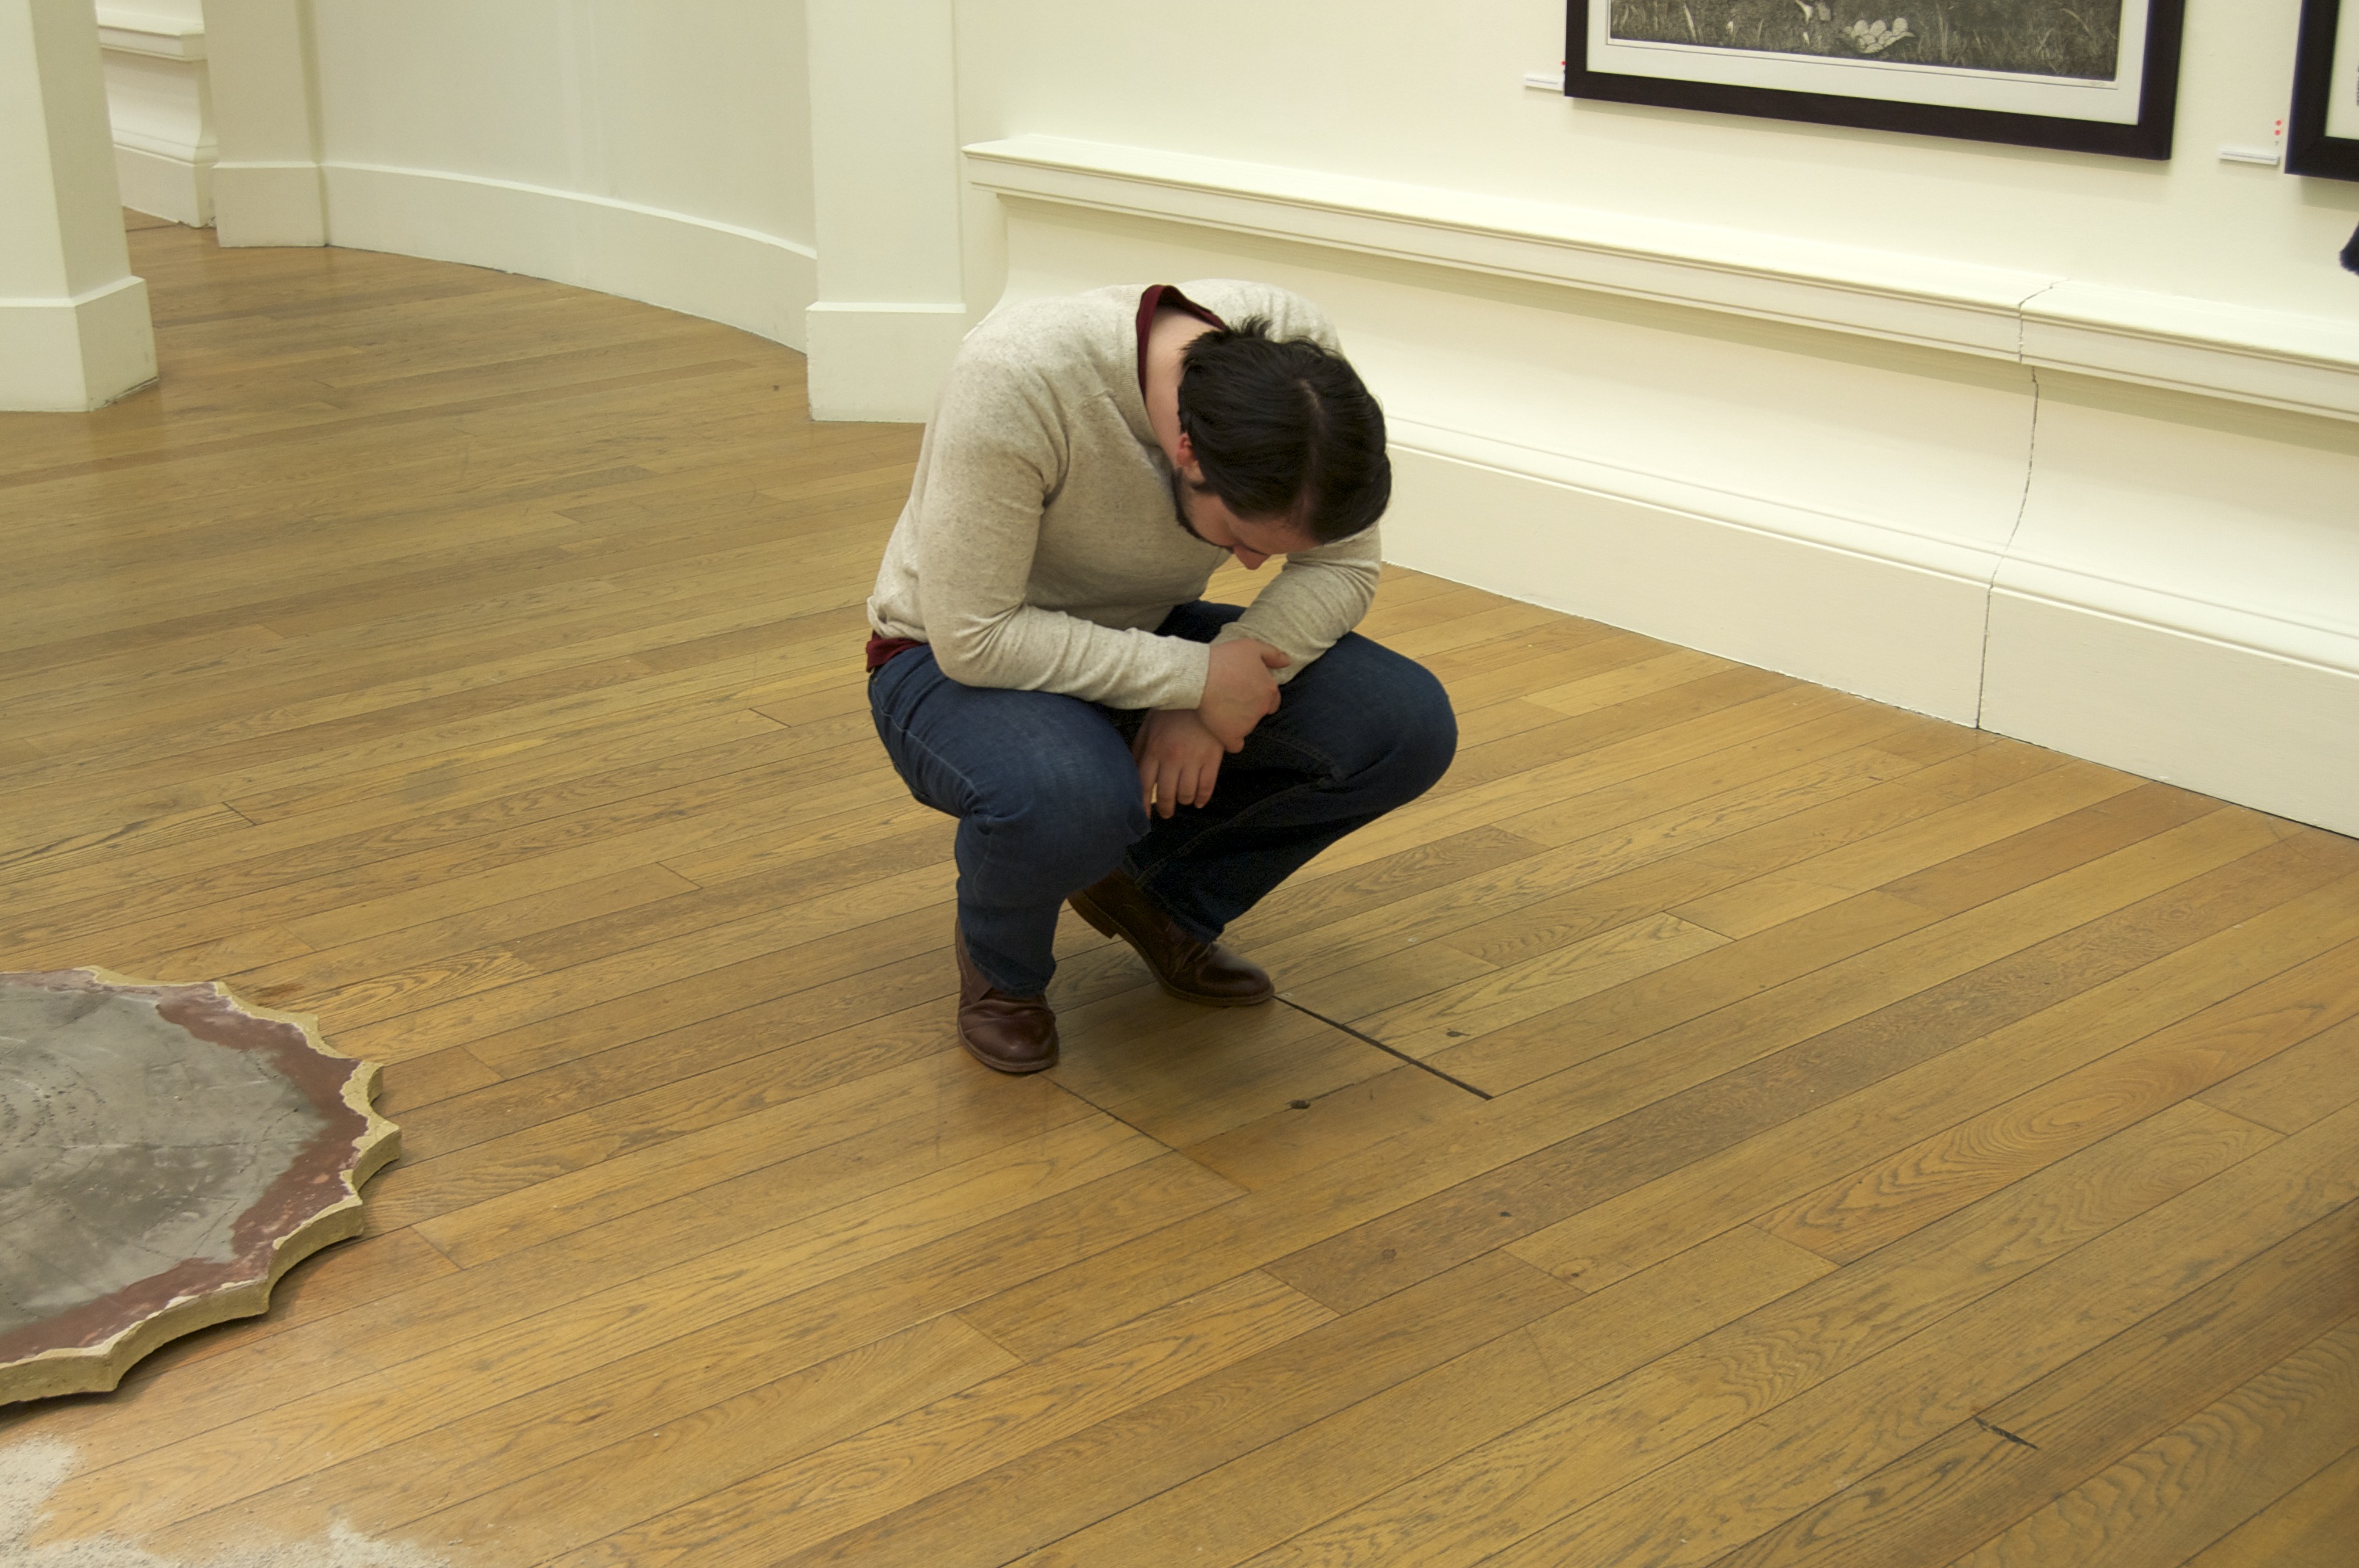 A gallery space with wooden floors. A man crouches down to look into a small hole in the floor.